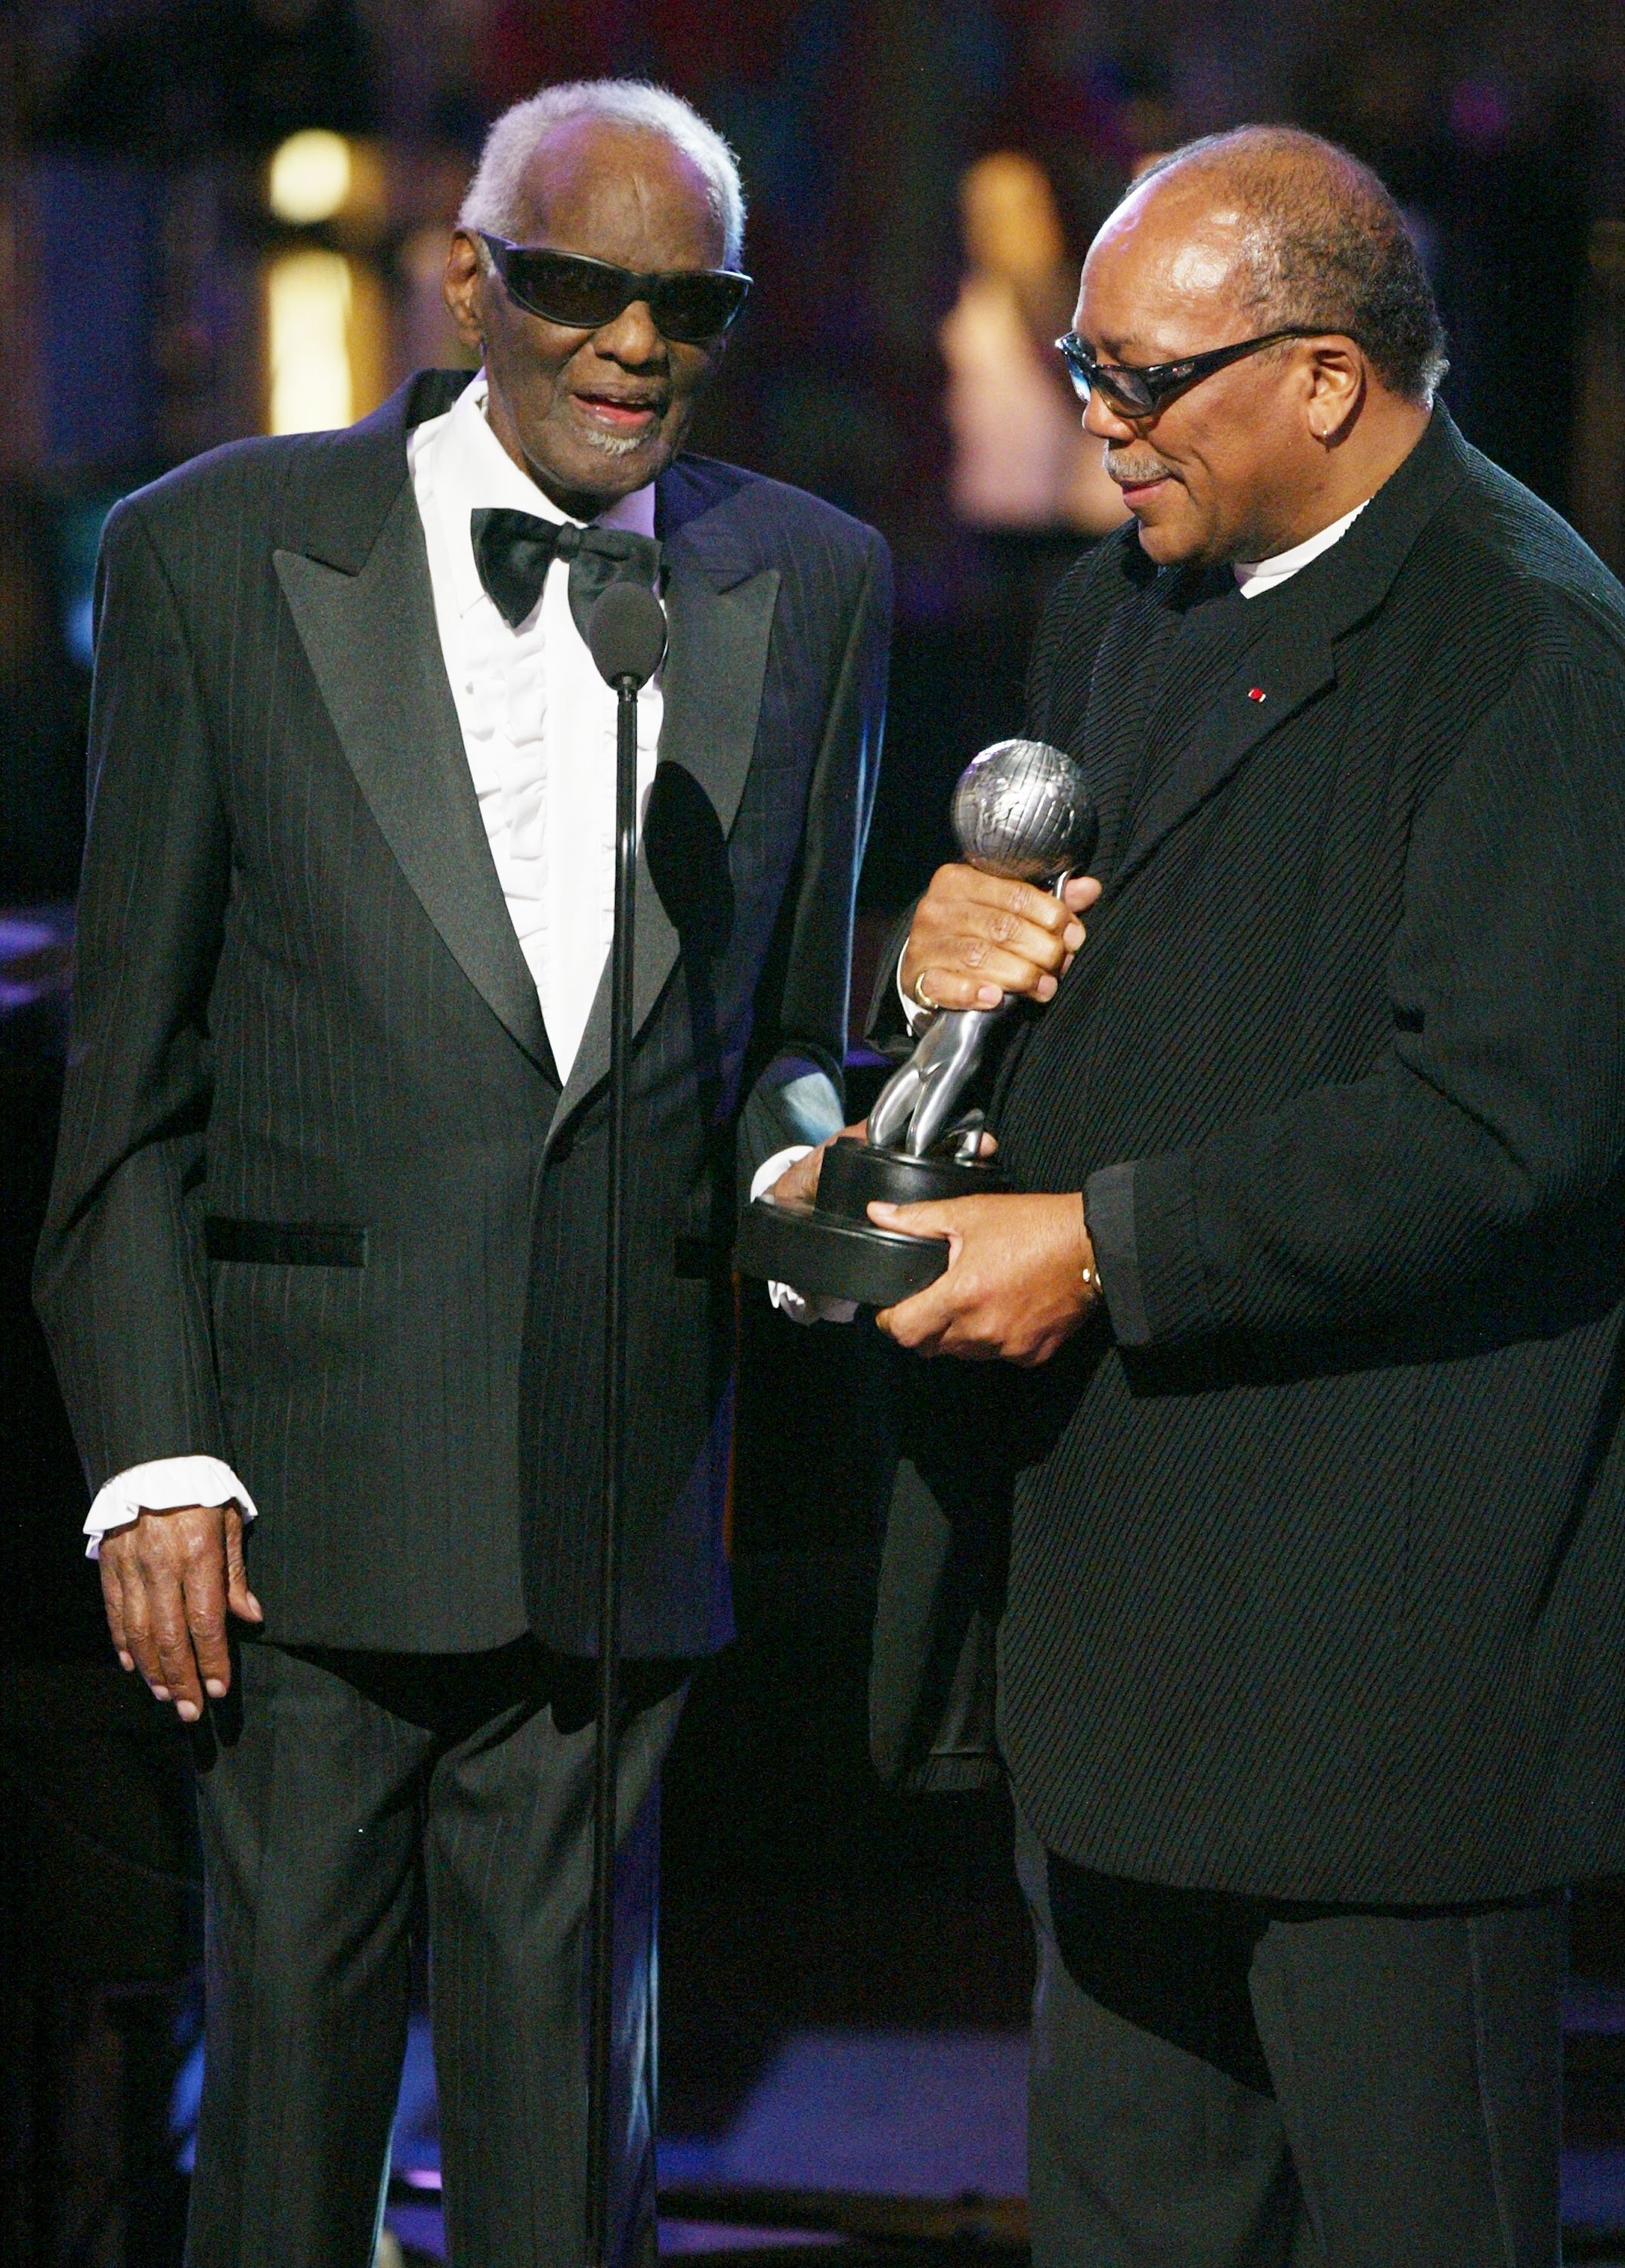 Ray Charles and Producer Quincy Jones on stage at the 35th Annual NAACP Image Awards at the Universal Amphitheatre, March 6, 2004 | Photo: Getty Images